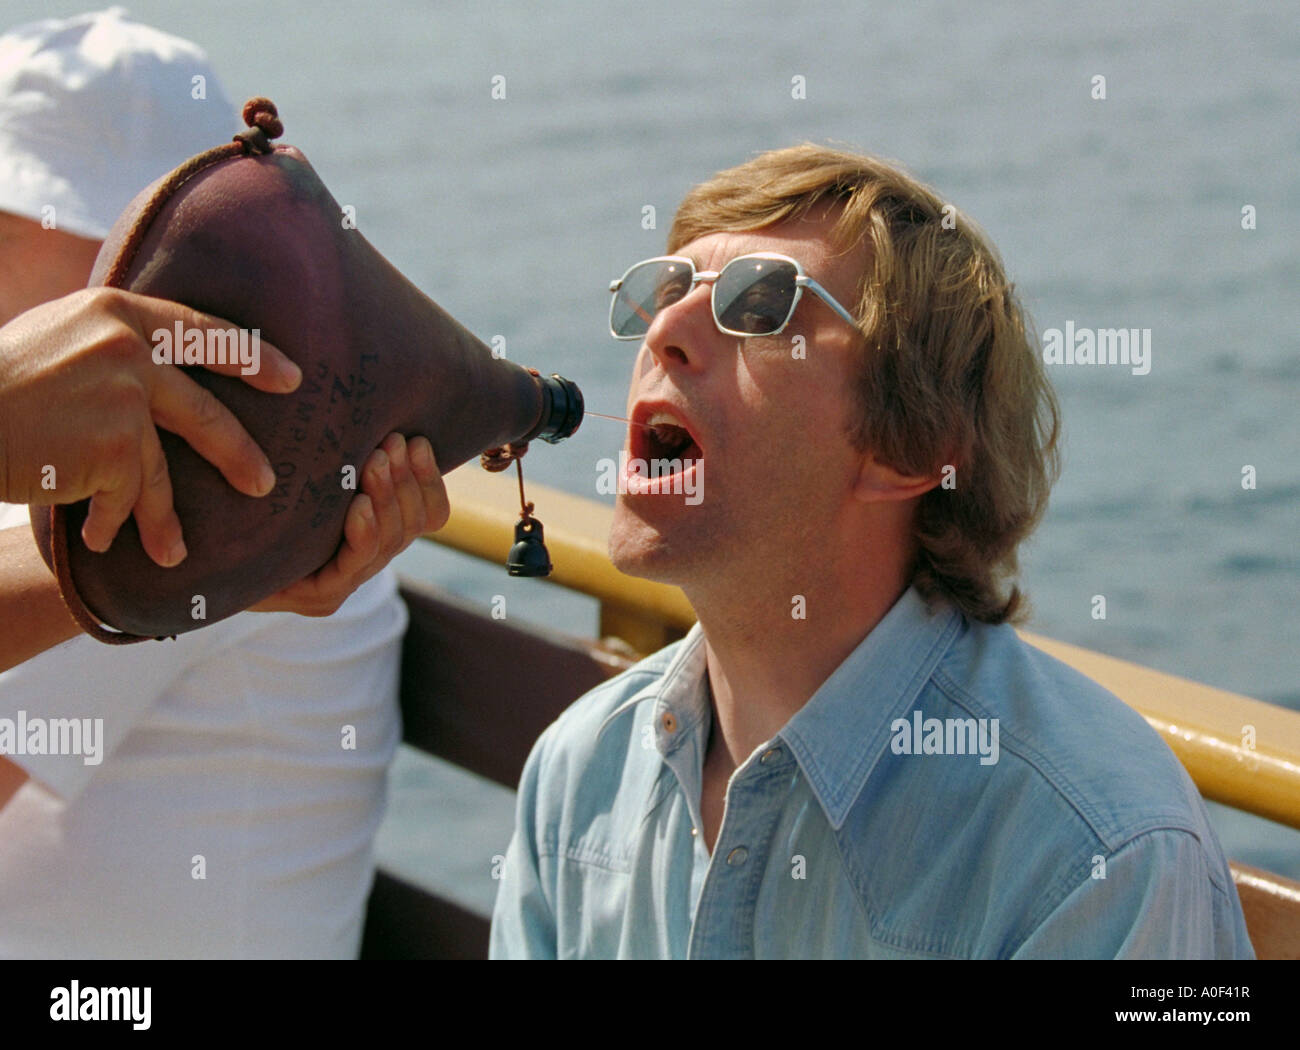 Squirting Wine into a Mans Mouth from a Wine Bag on a Tourist Boat Trip Stock Photo